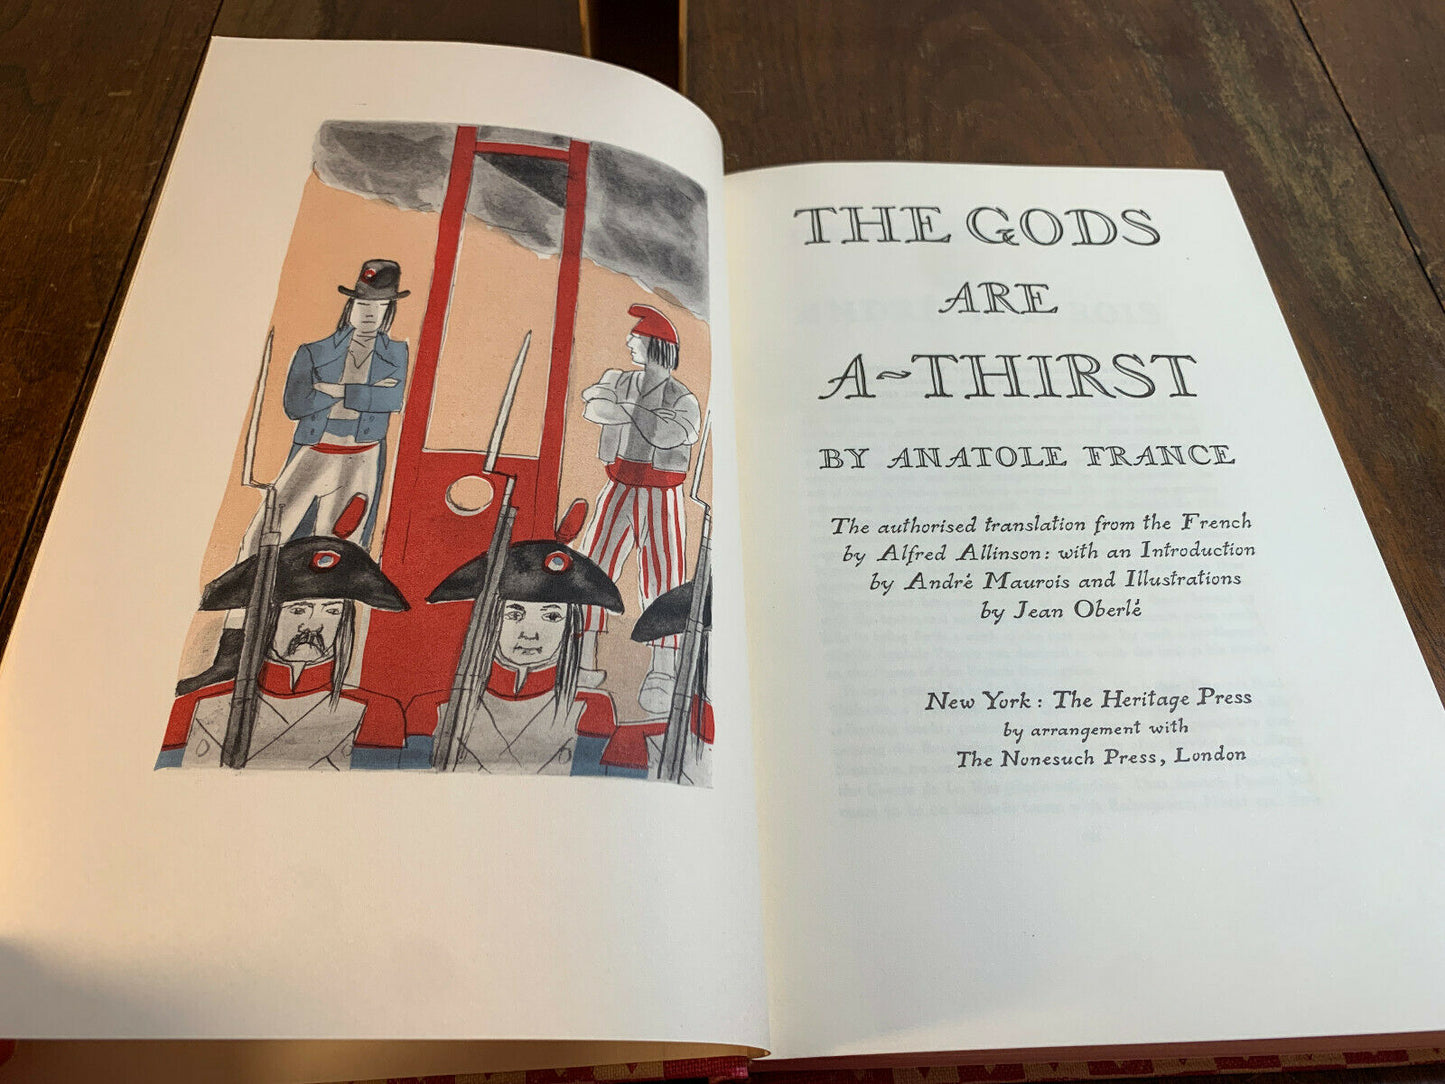 The Gods Are A-Thirst by Anatole France